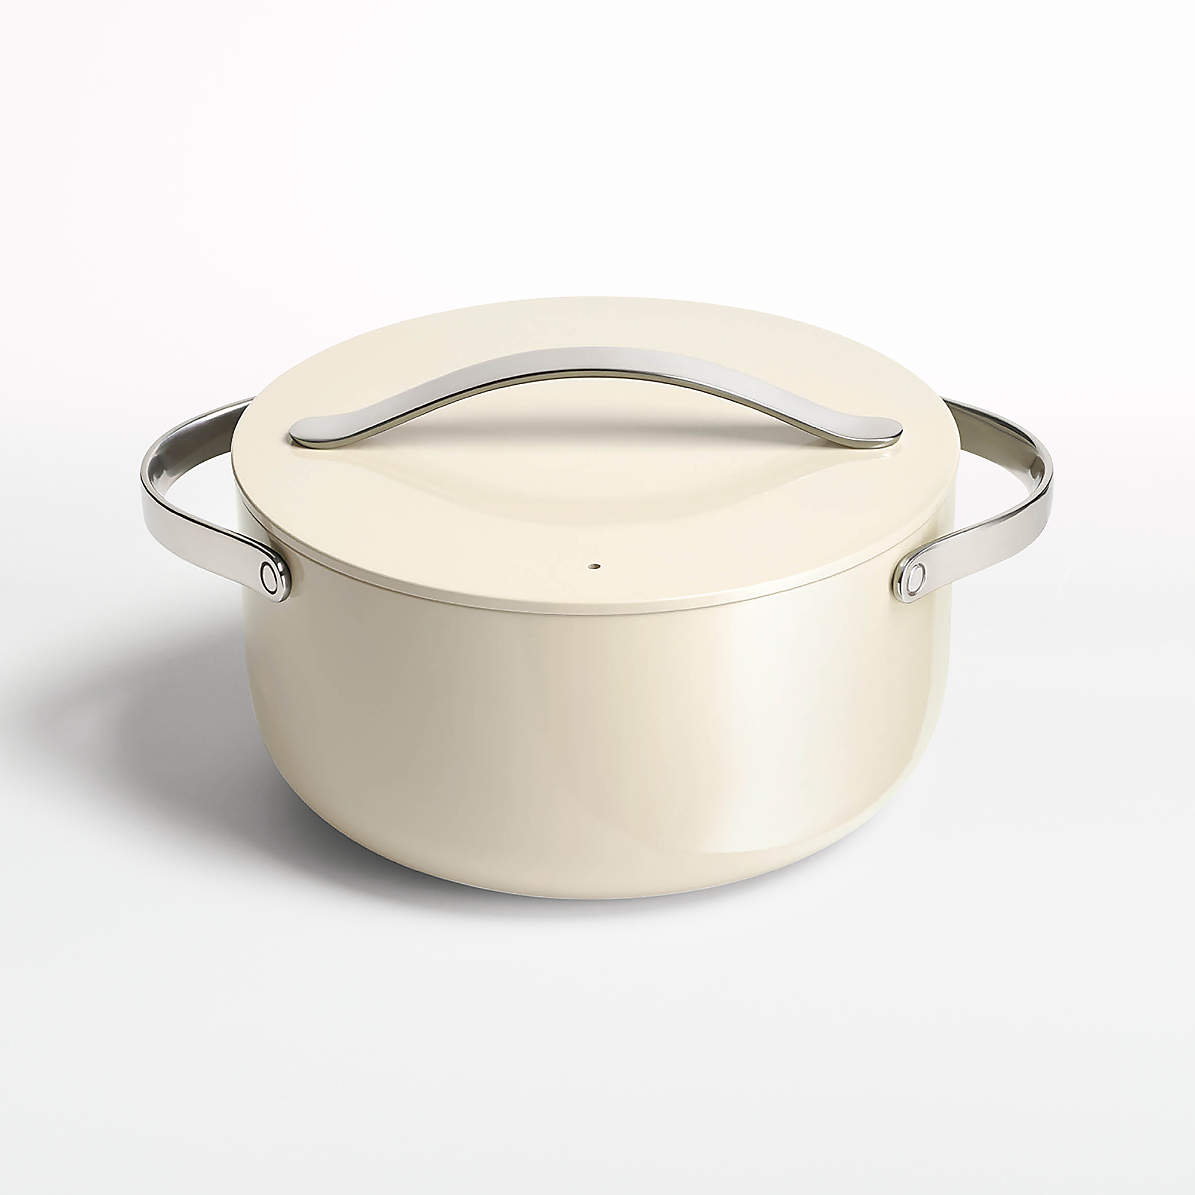 Caraway Cream Non-Stick Ceramic 6.5-Qt. Dutch Oven with Gold Hardware +  Reviews